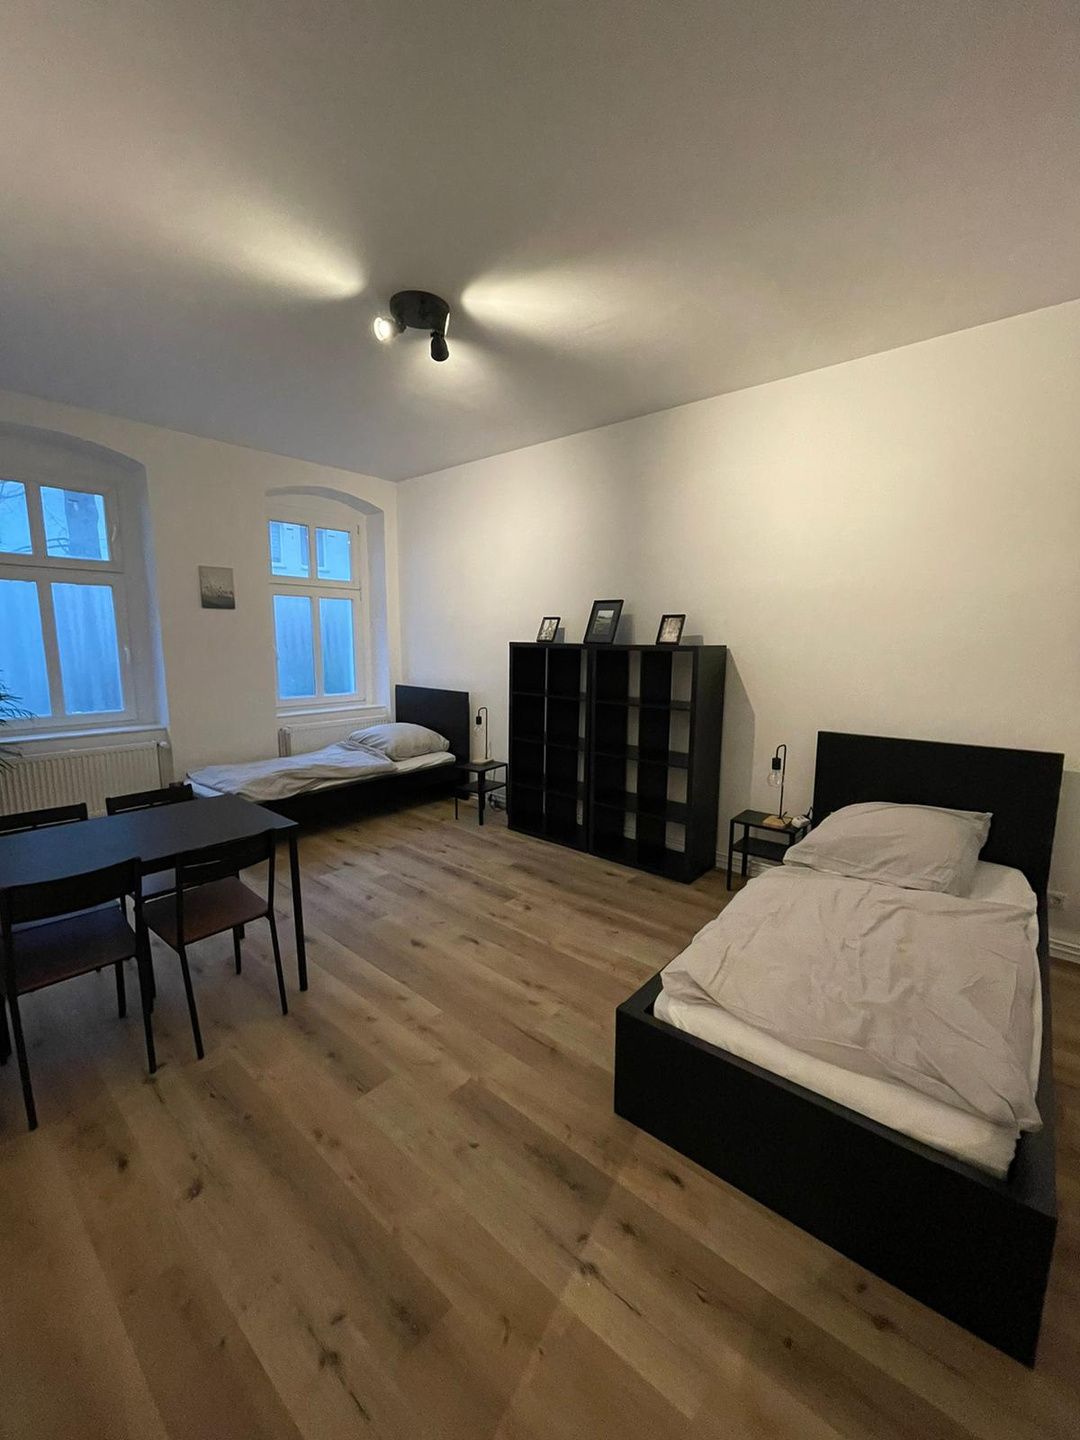 Large Group Paradise: Spacious 93sqm Apartment in Central Berlin - up to 8 people